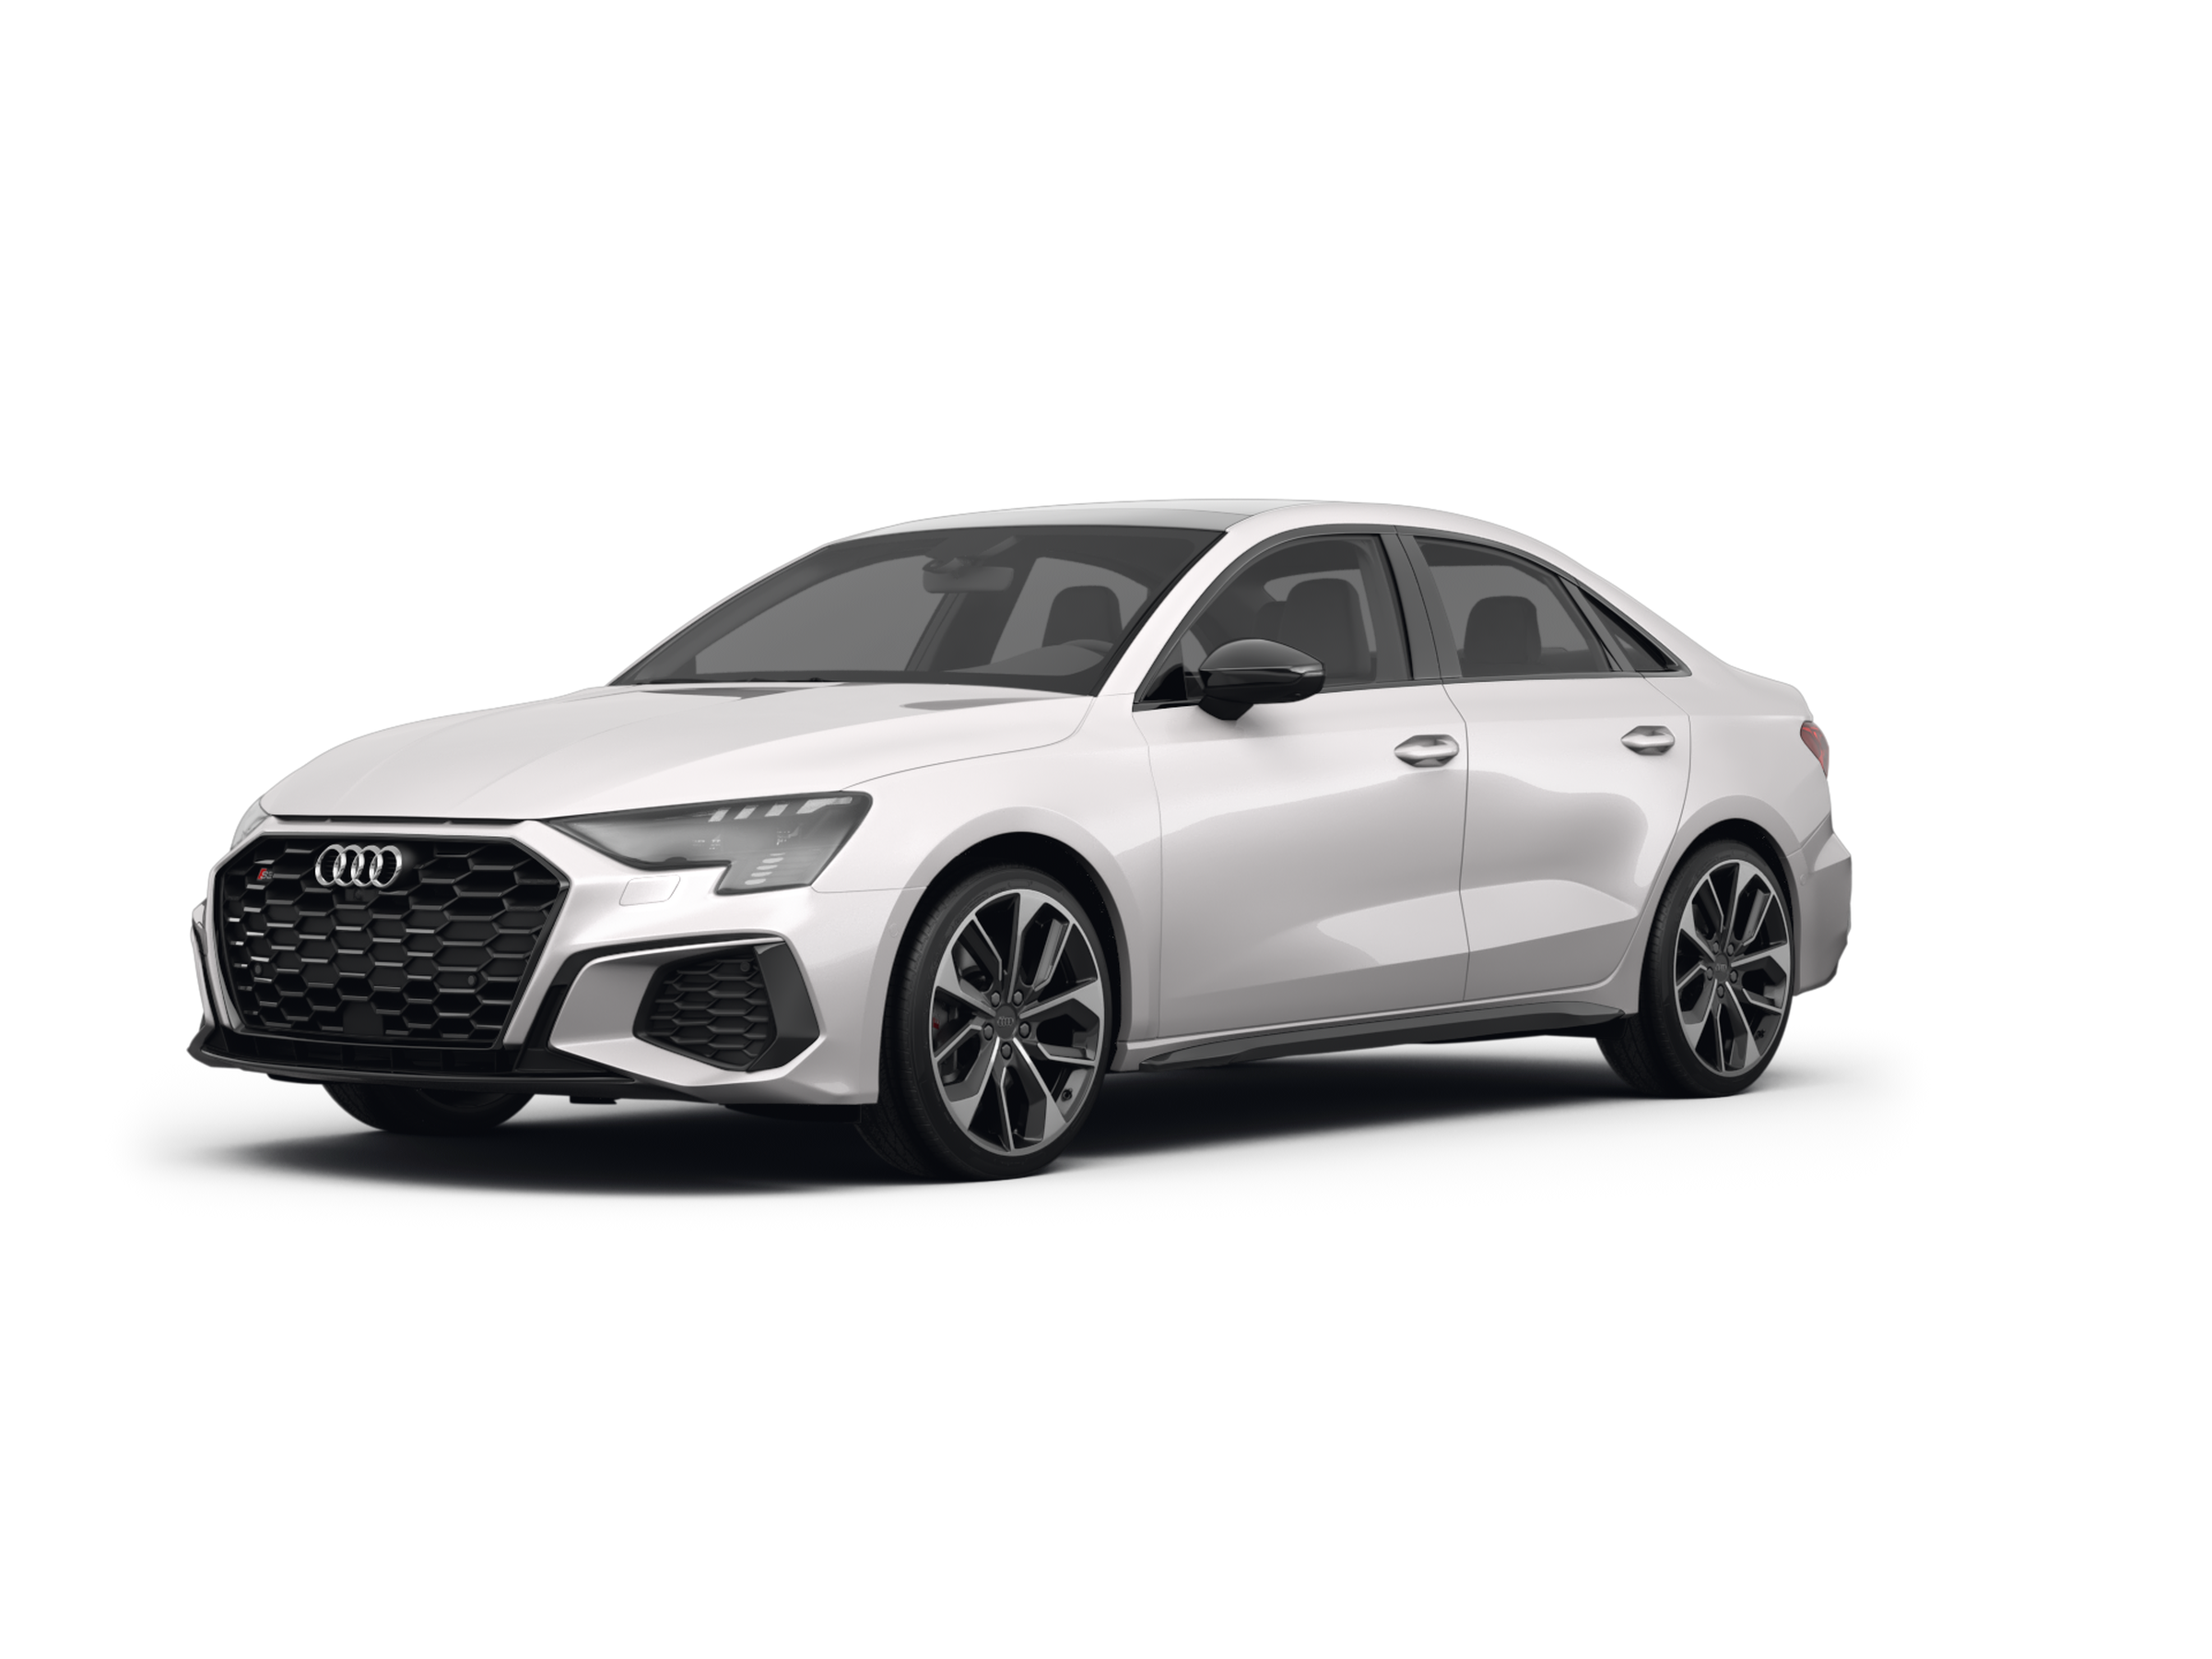 2022 Audi A3 And S3 Sedan Pricing Announced, Hot One Starts At $44,900